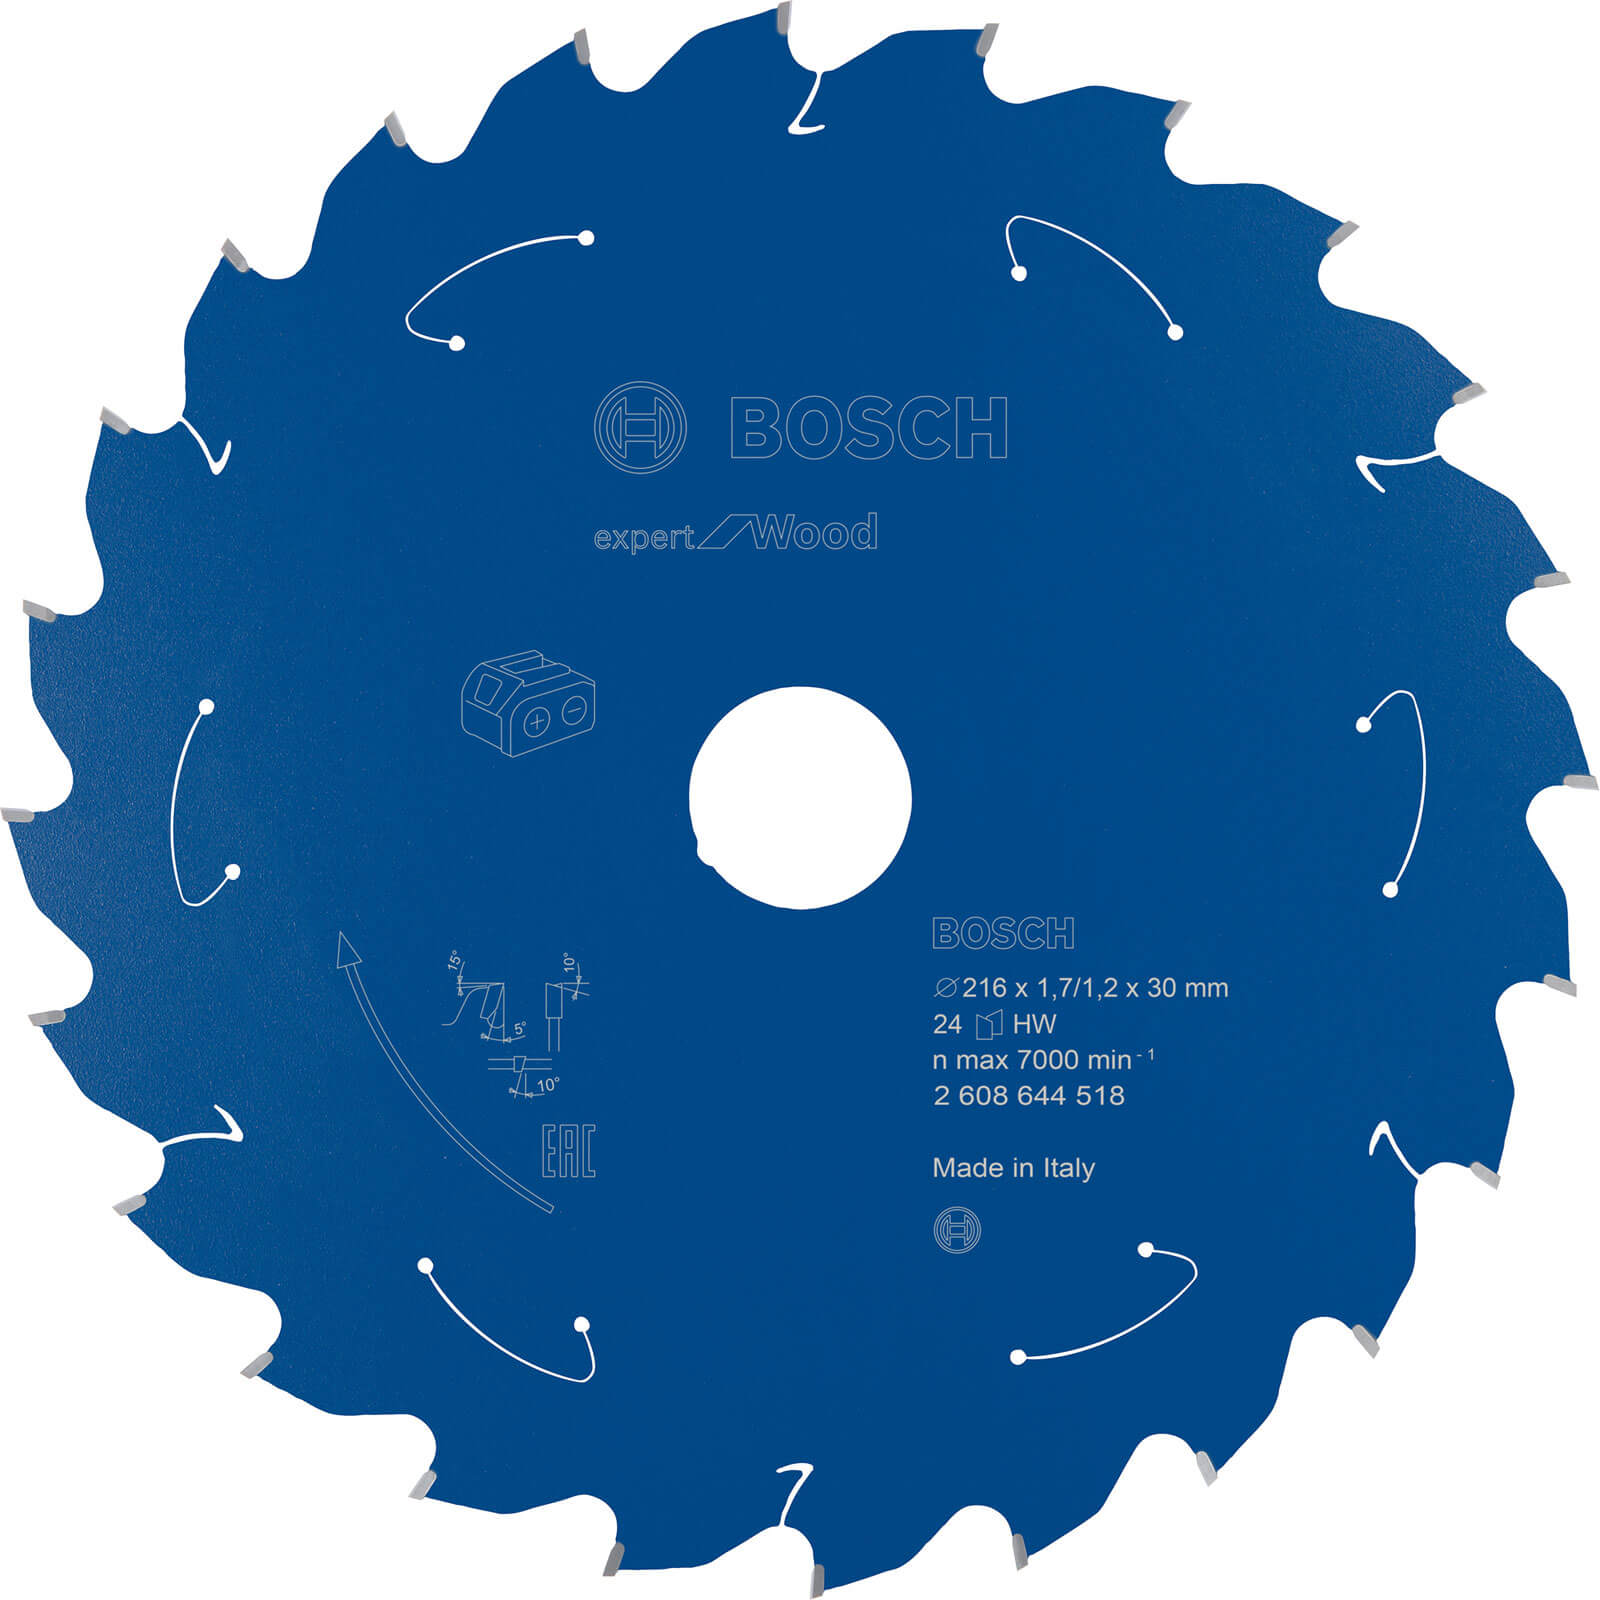 Photos - Power Tool Accessory Bosch Expert Wood Cutting Cordless Mitre Saw Blade 216mm 24T 30mm 26086445 